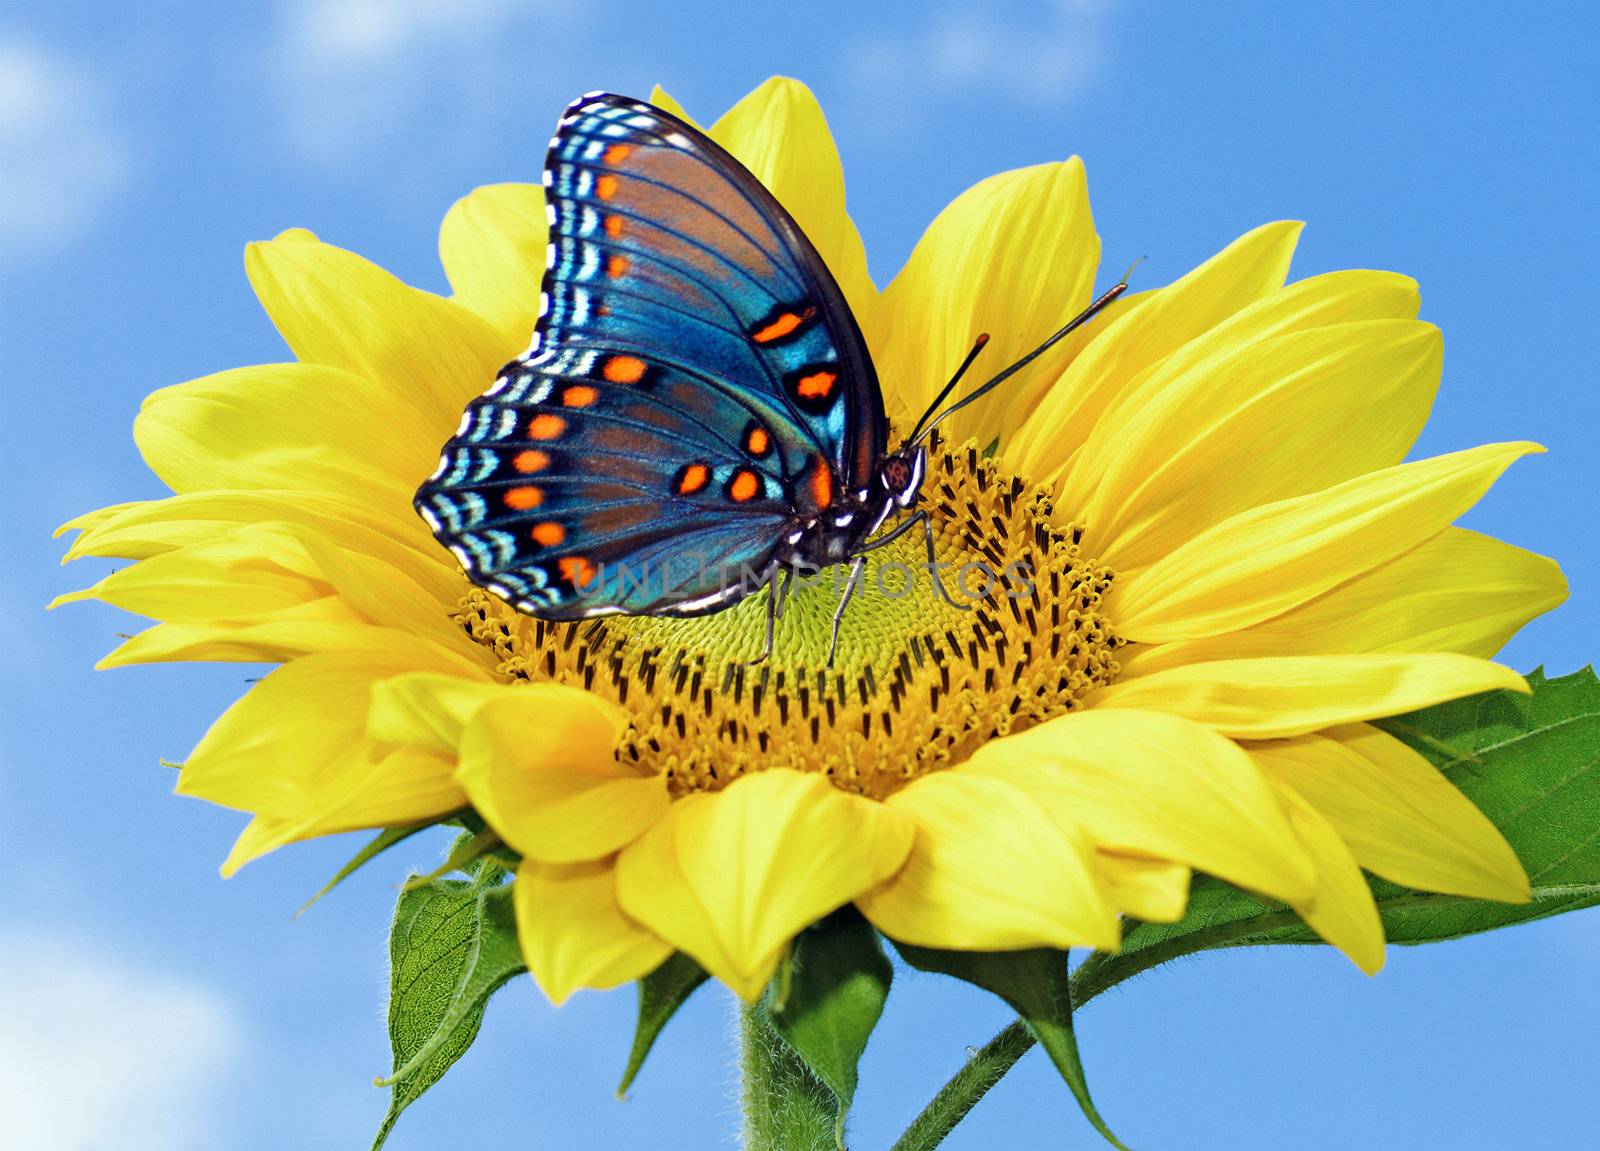 	
Sunflower with blue butterfly 